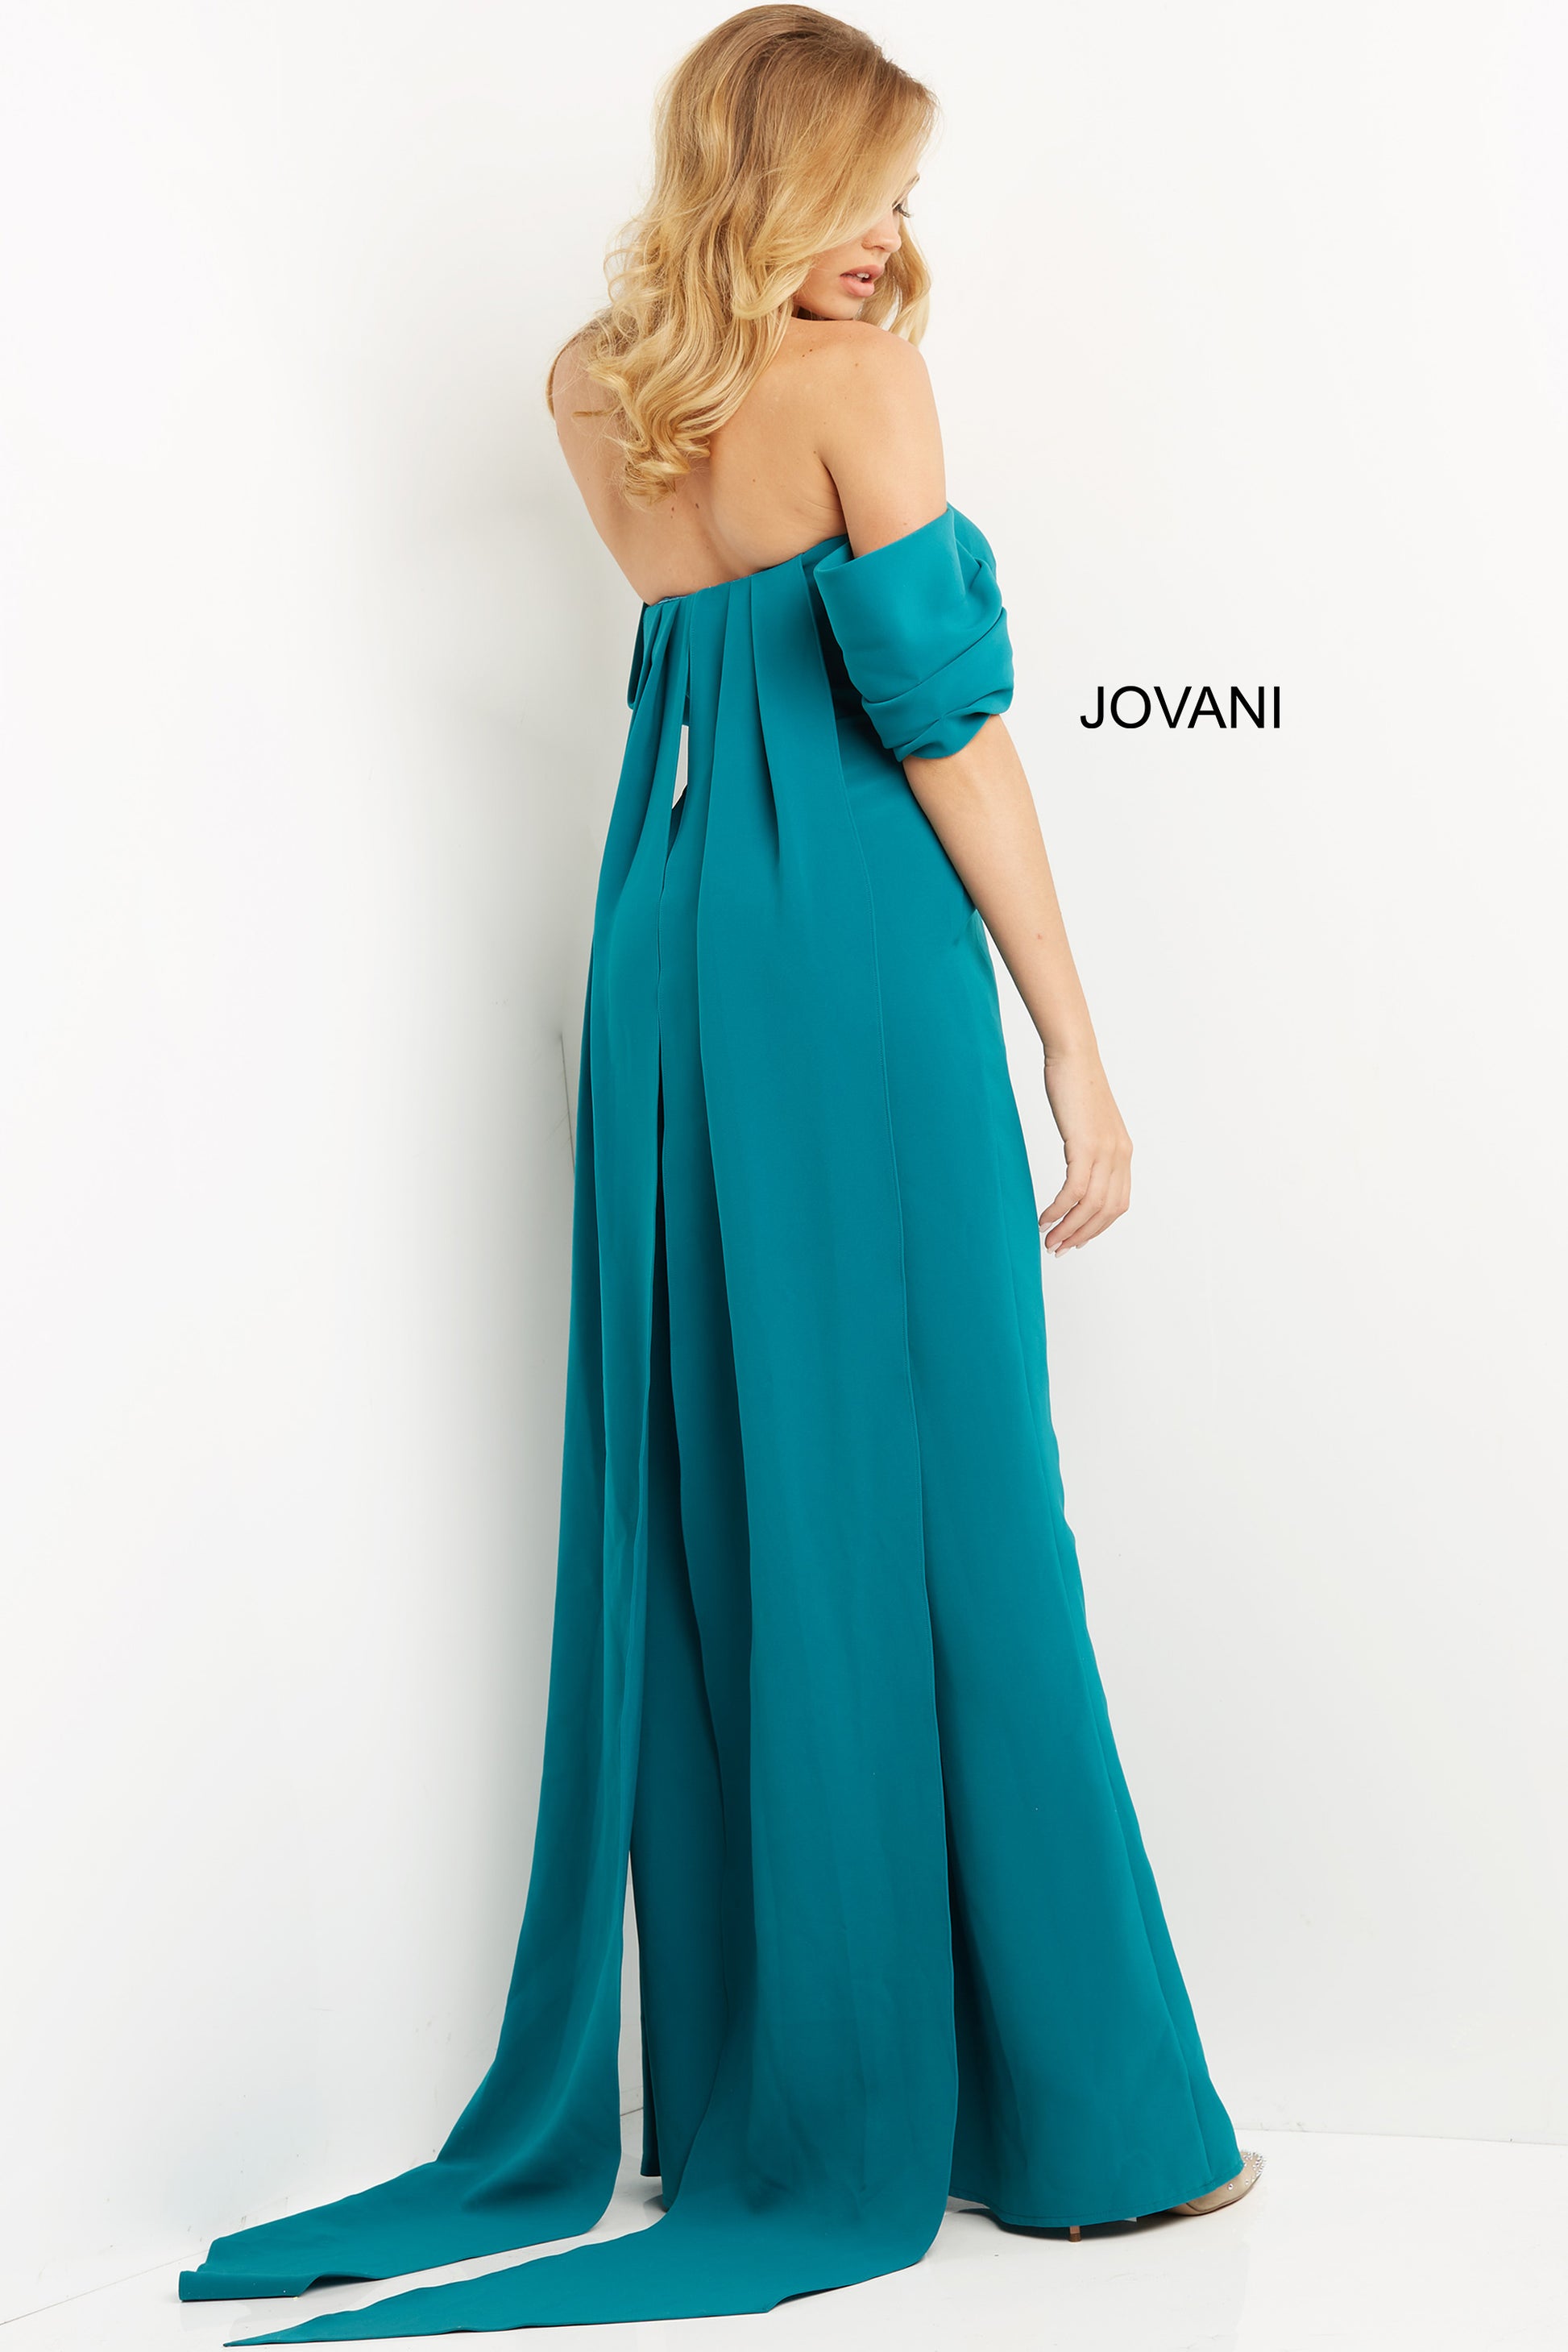 Jovani 08209 Back Formal Jumpsuit Strapless Cape Sleeves Crepe Fit and Flare Pants